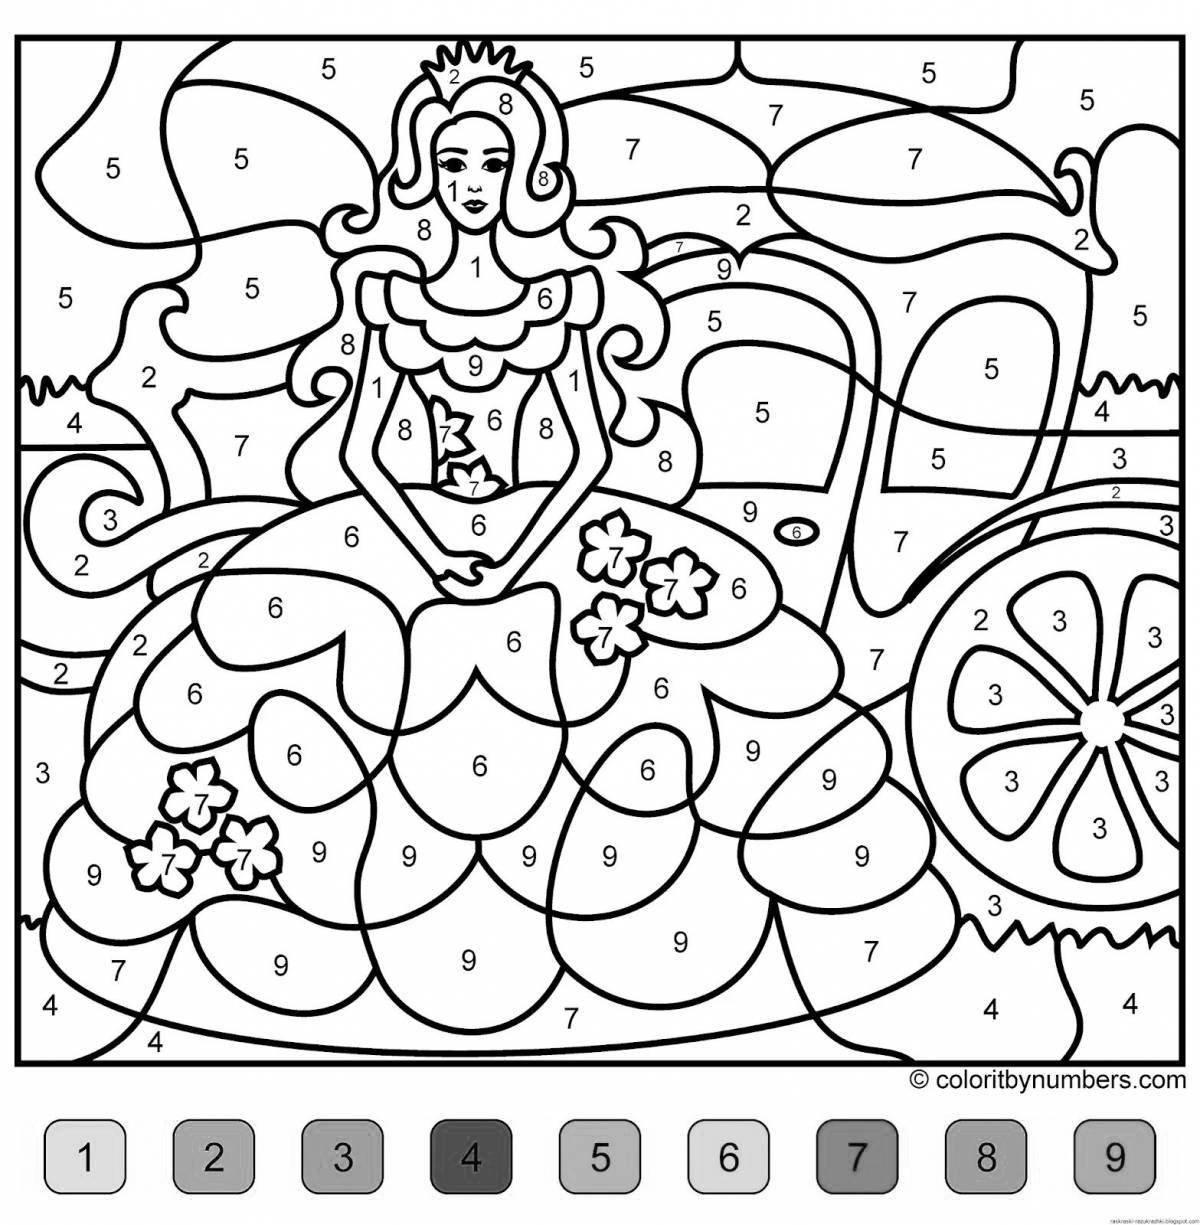 Colorful coloring game for 4-5 year olds for girls